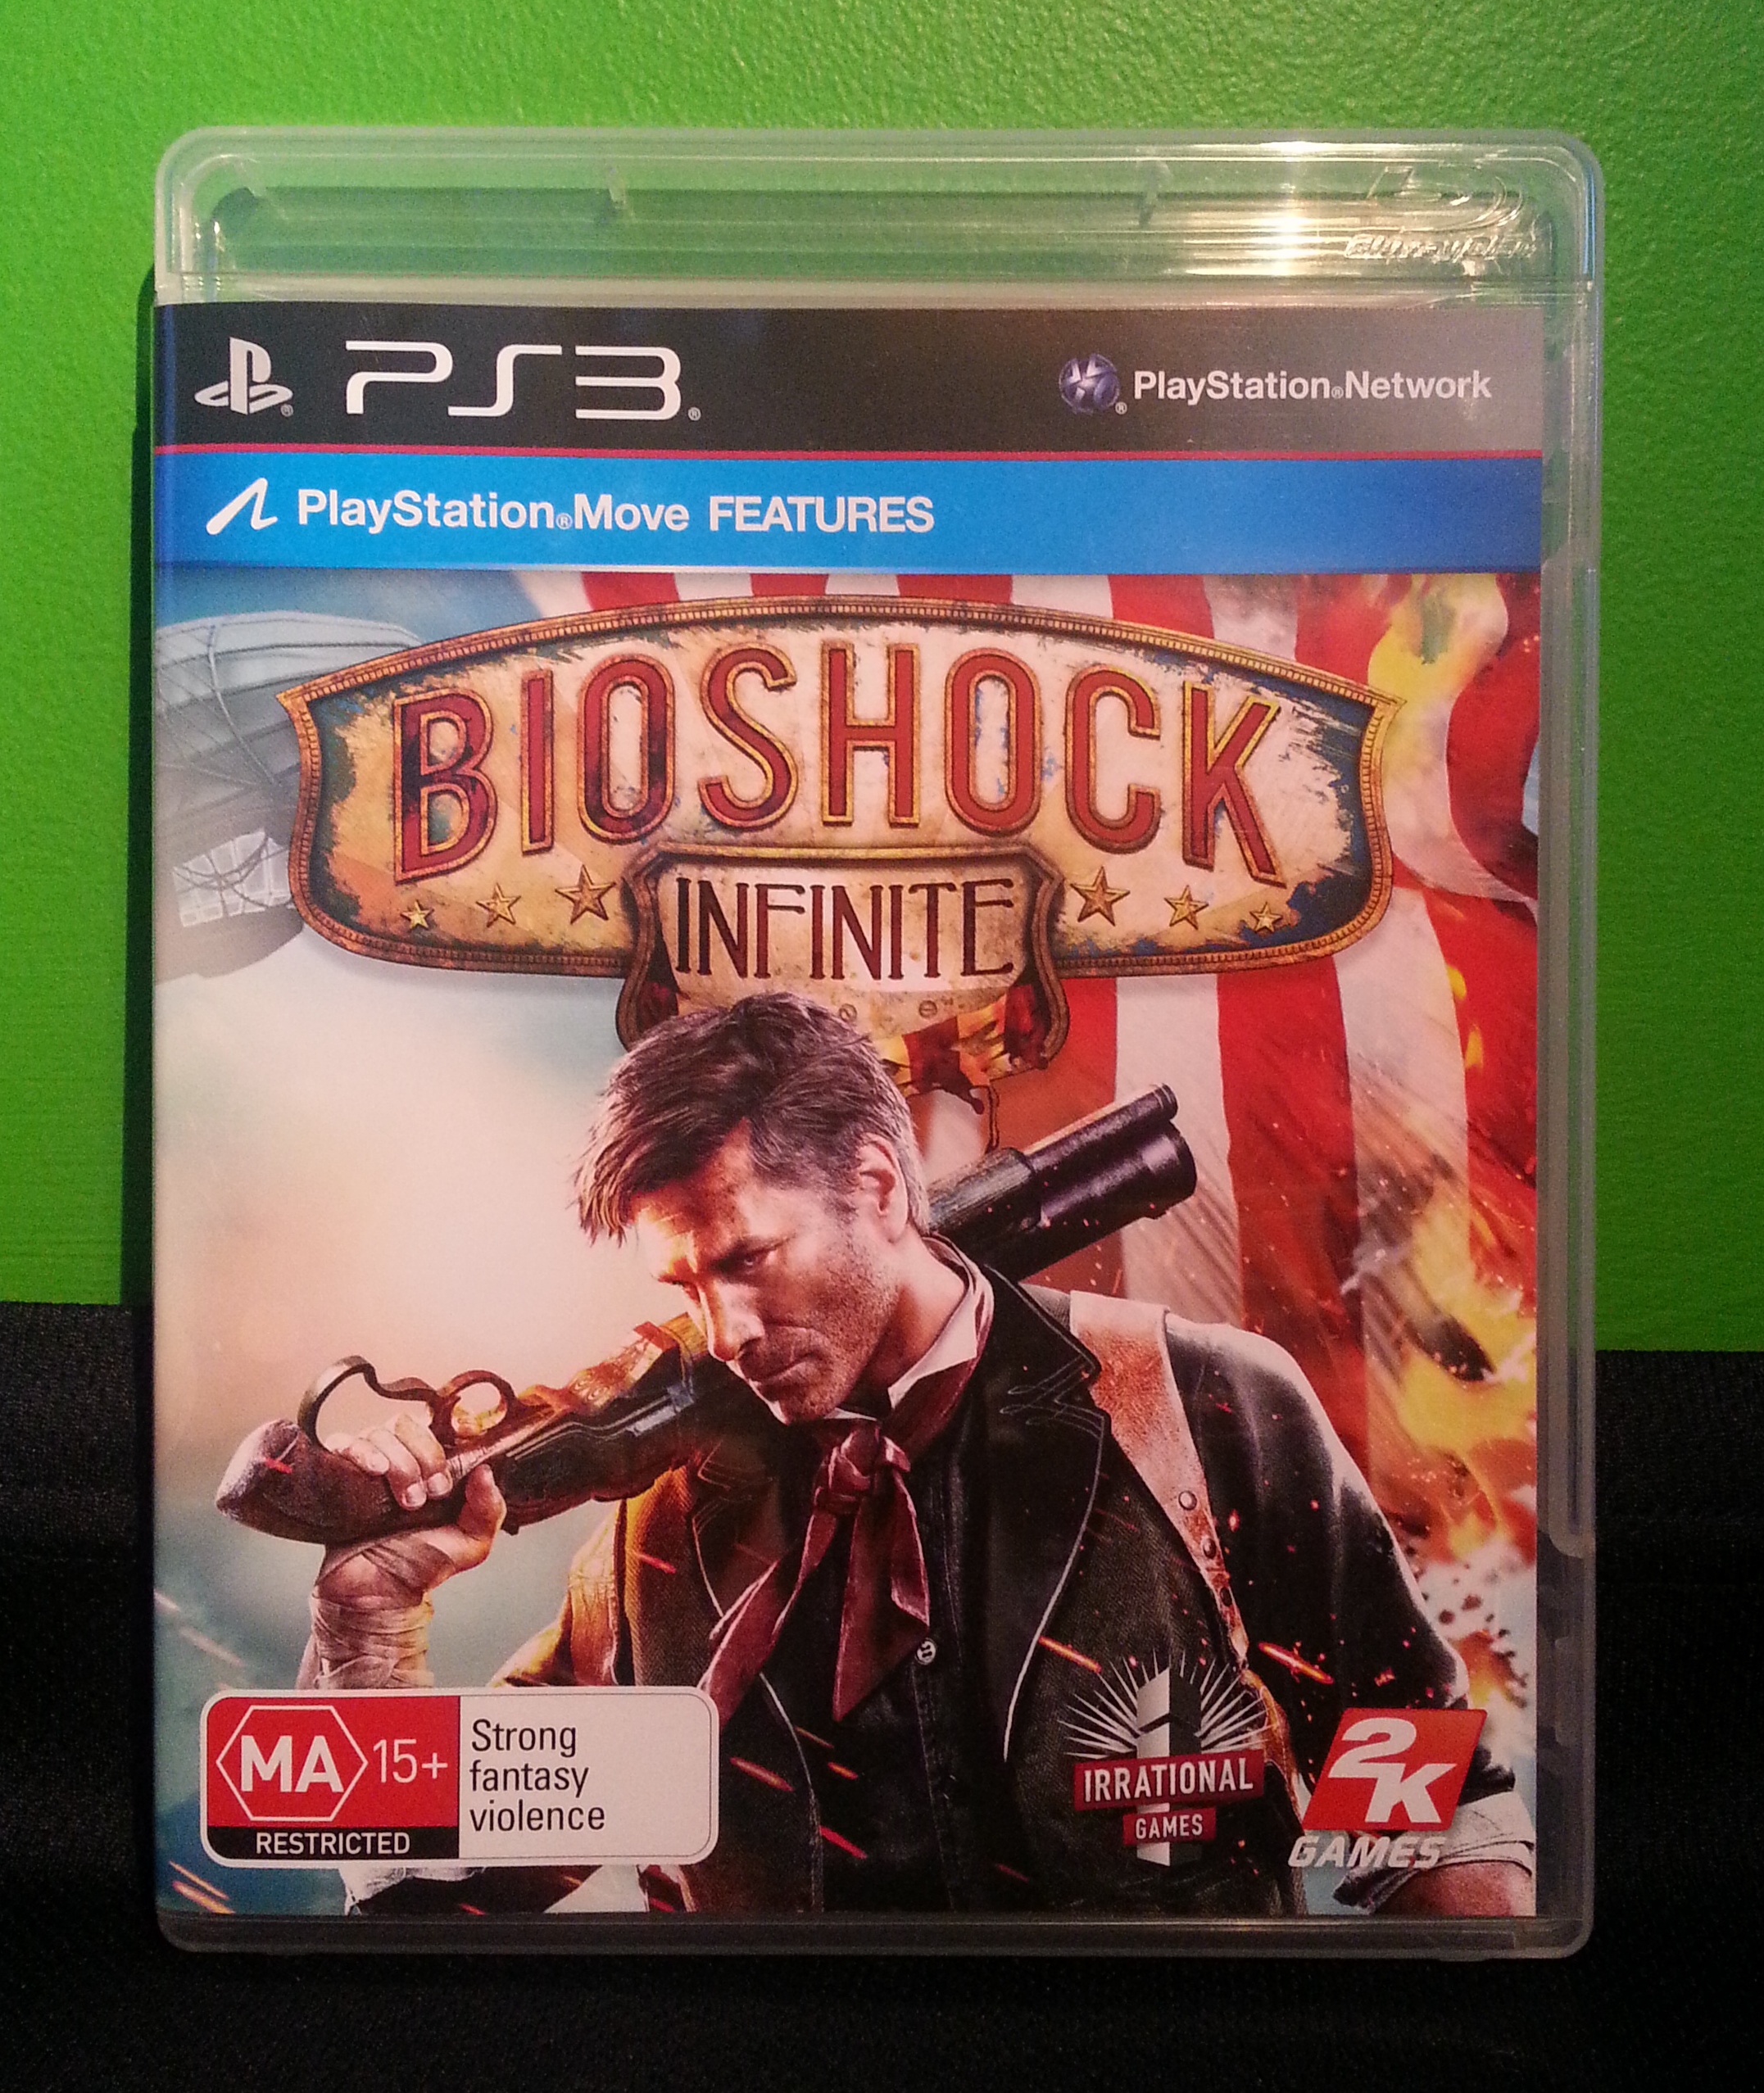 Can Beat Bioshock Infinite Only Using the PlayStation Move? 